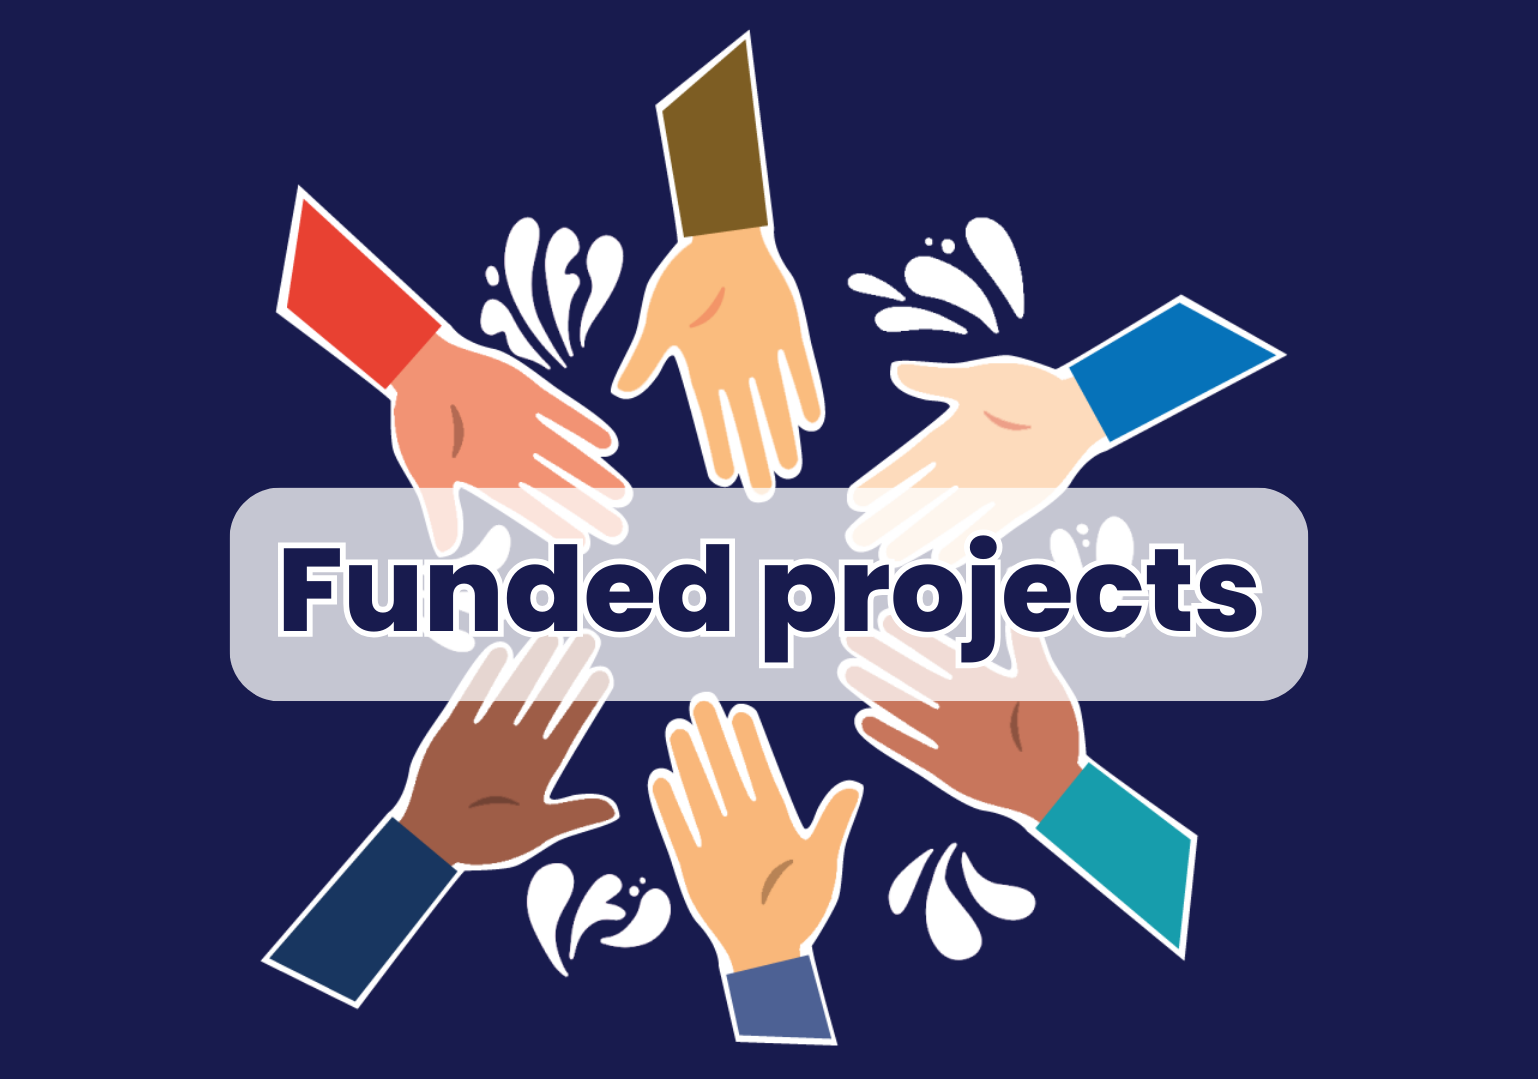 image relating to Funded projects